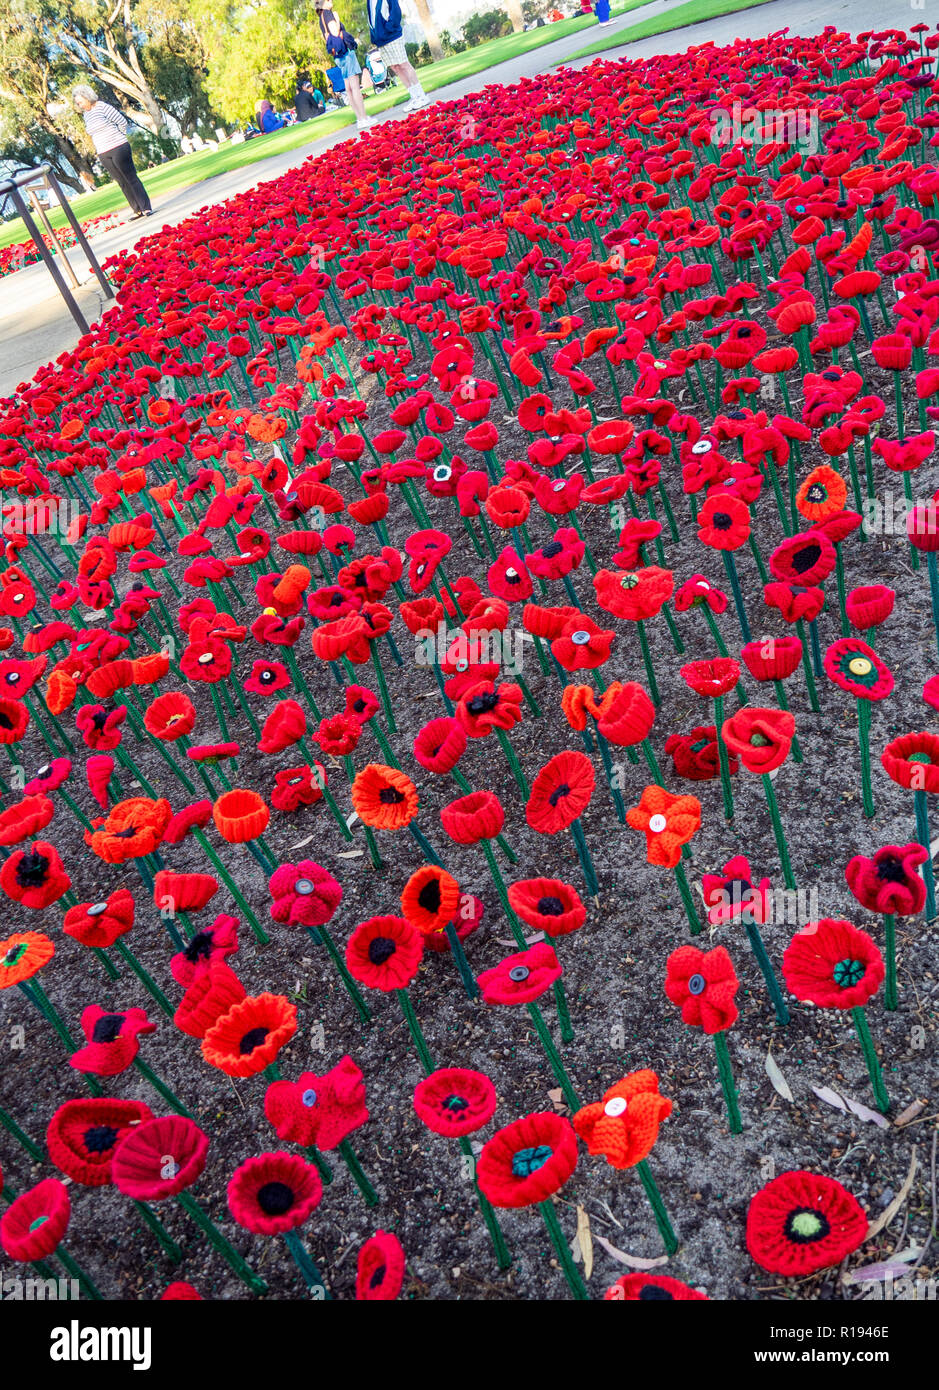 2018 Remembrance Day Poppy Project display of handcrafted poppies in Kings Park Perth Western Australia Stock Photo